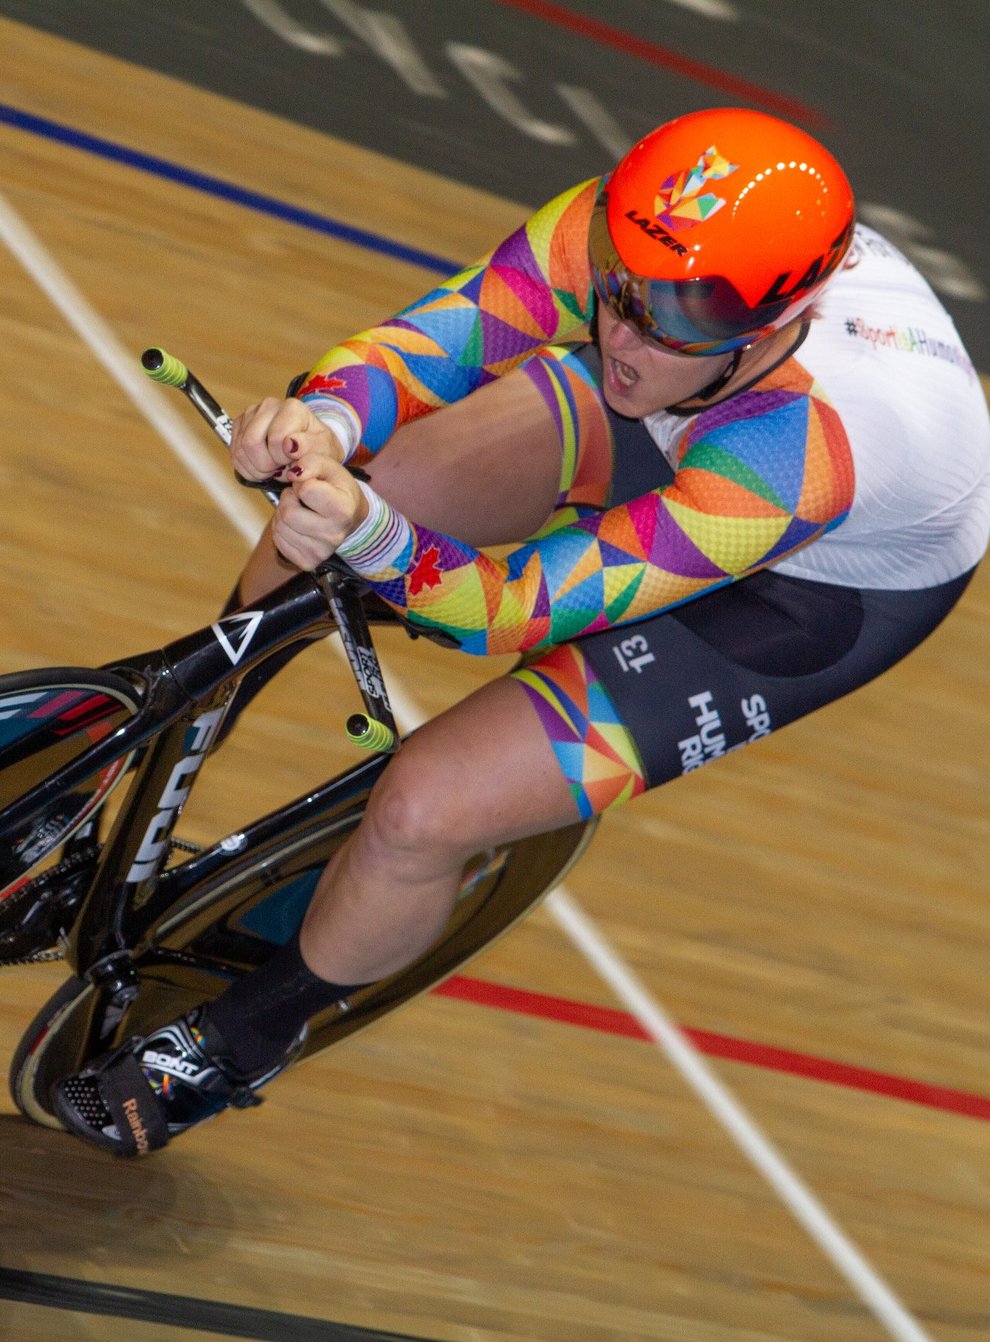 Rachel McKinnon is one of the most high-profile transgender cyclists (Twitter: @SportIsARight)